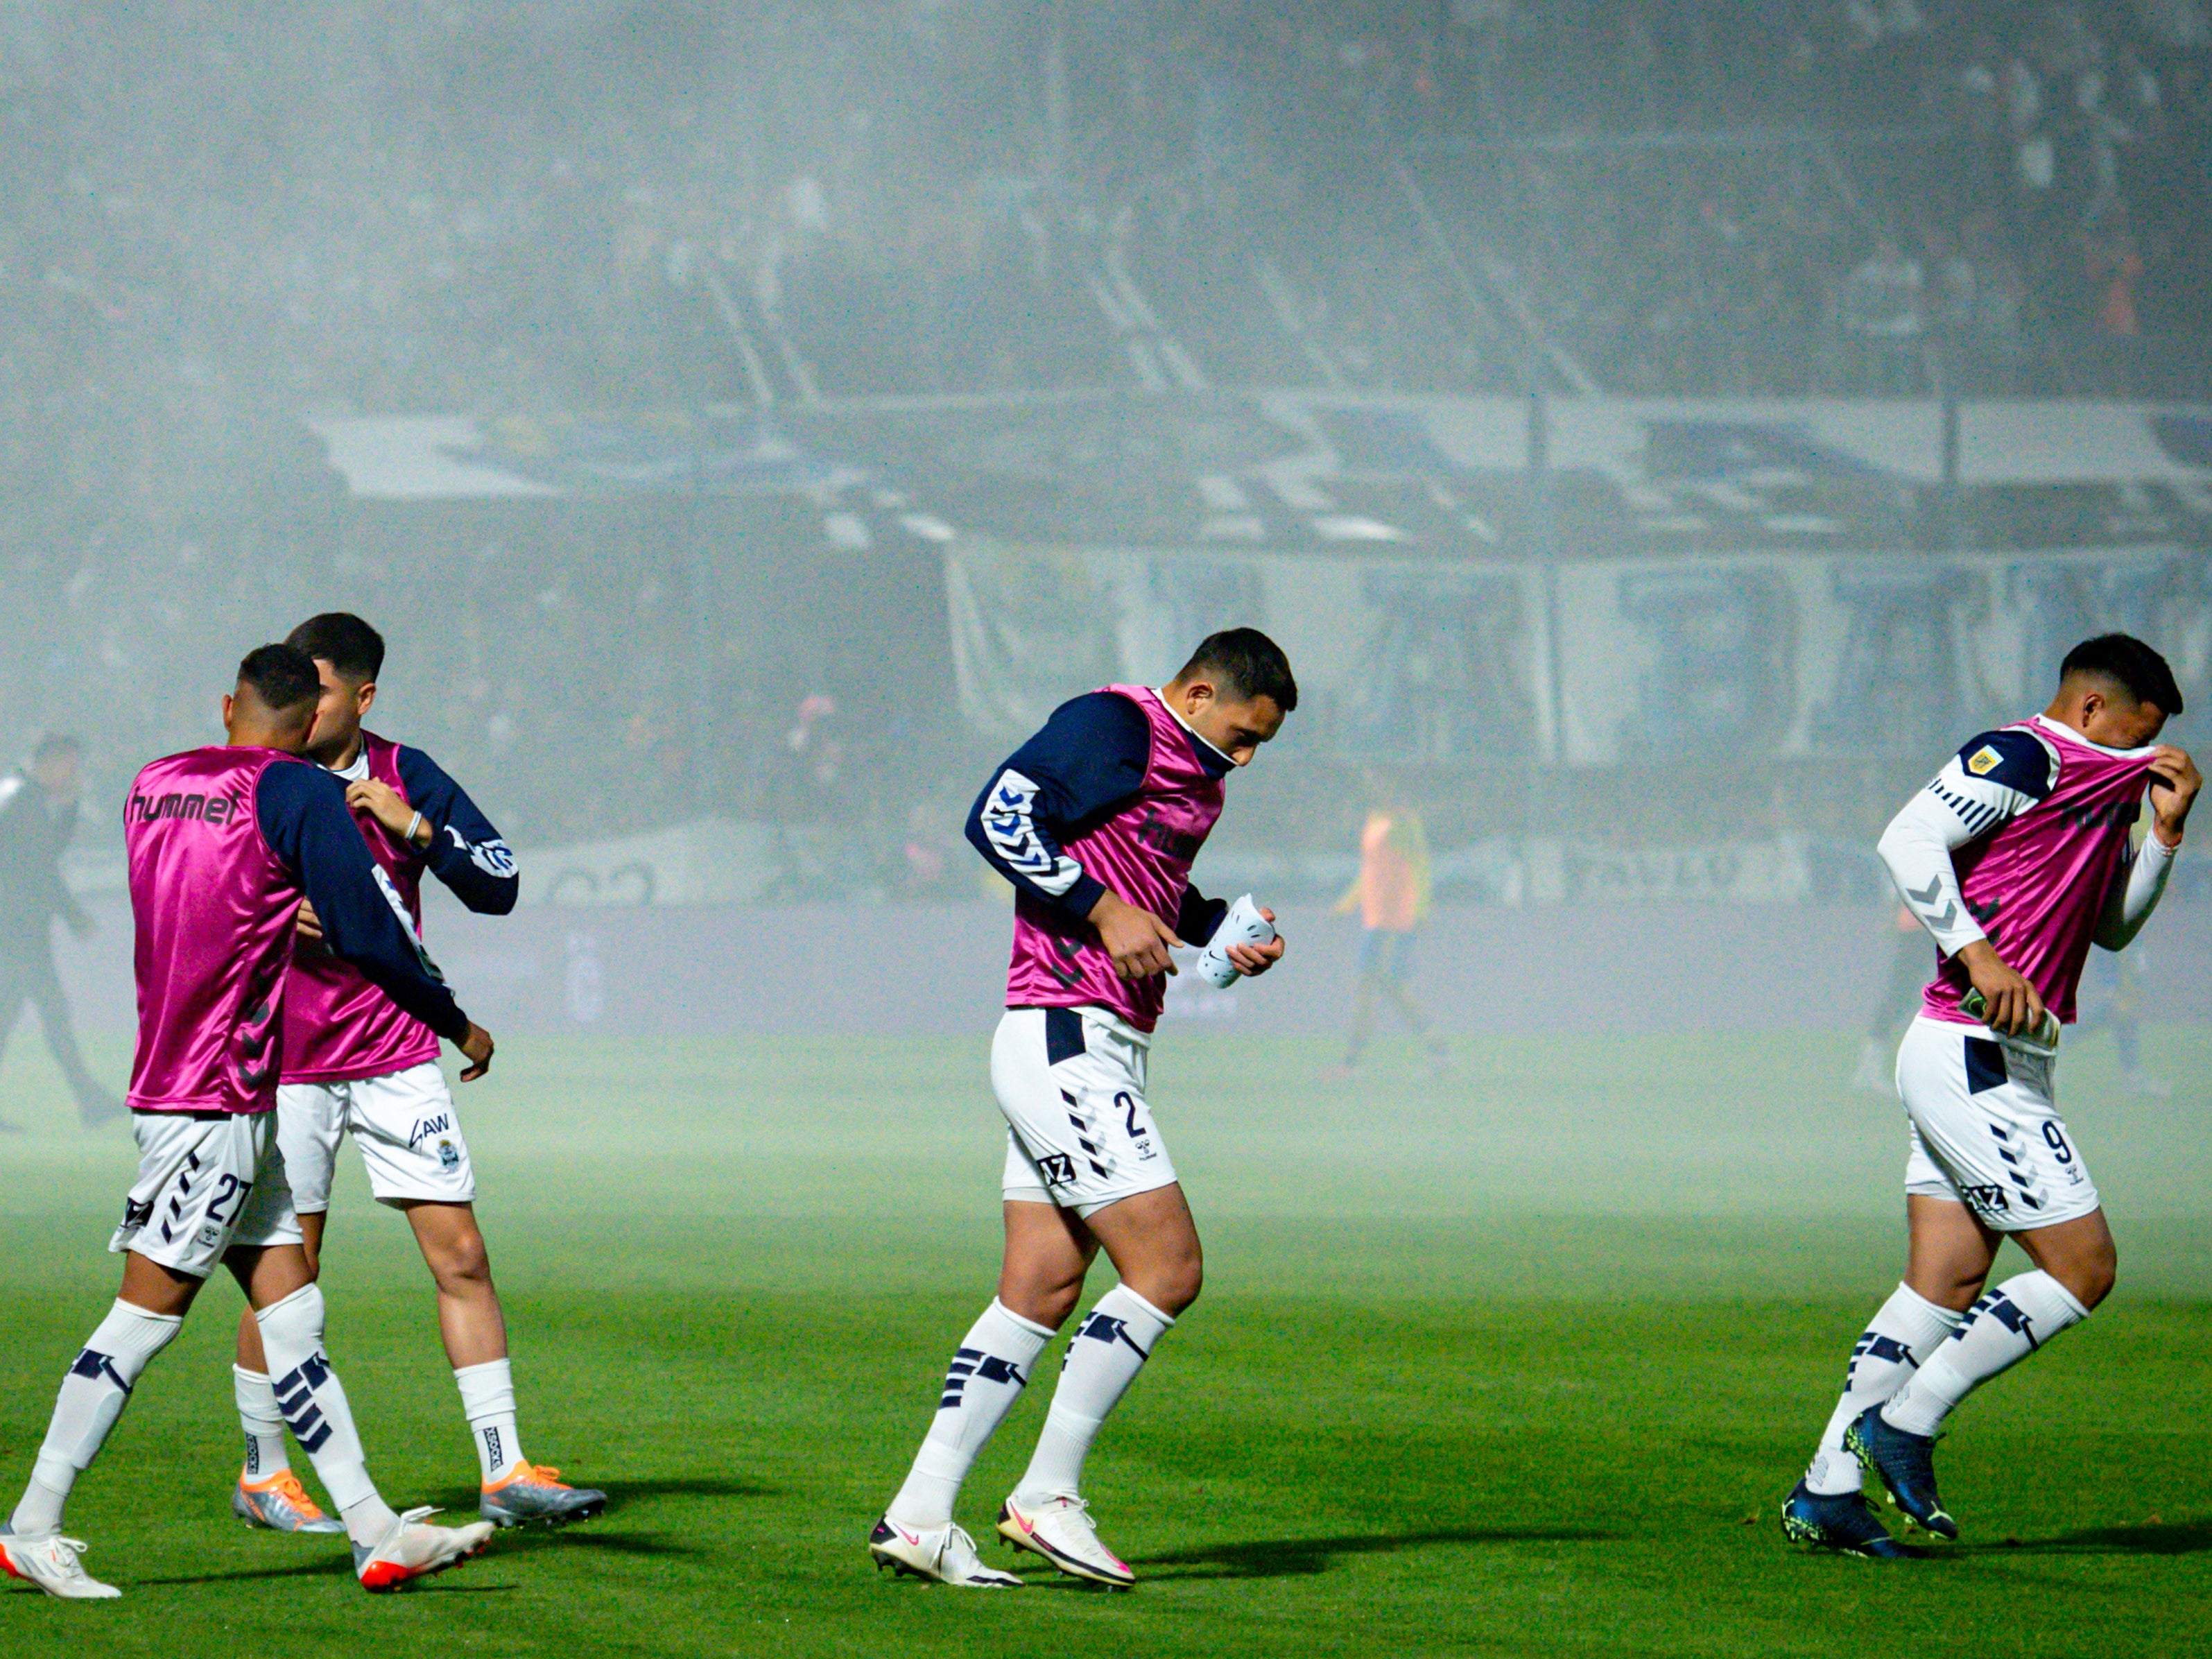 Gimnasia La Plata players were forced to cover their faces